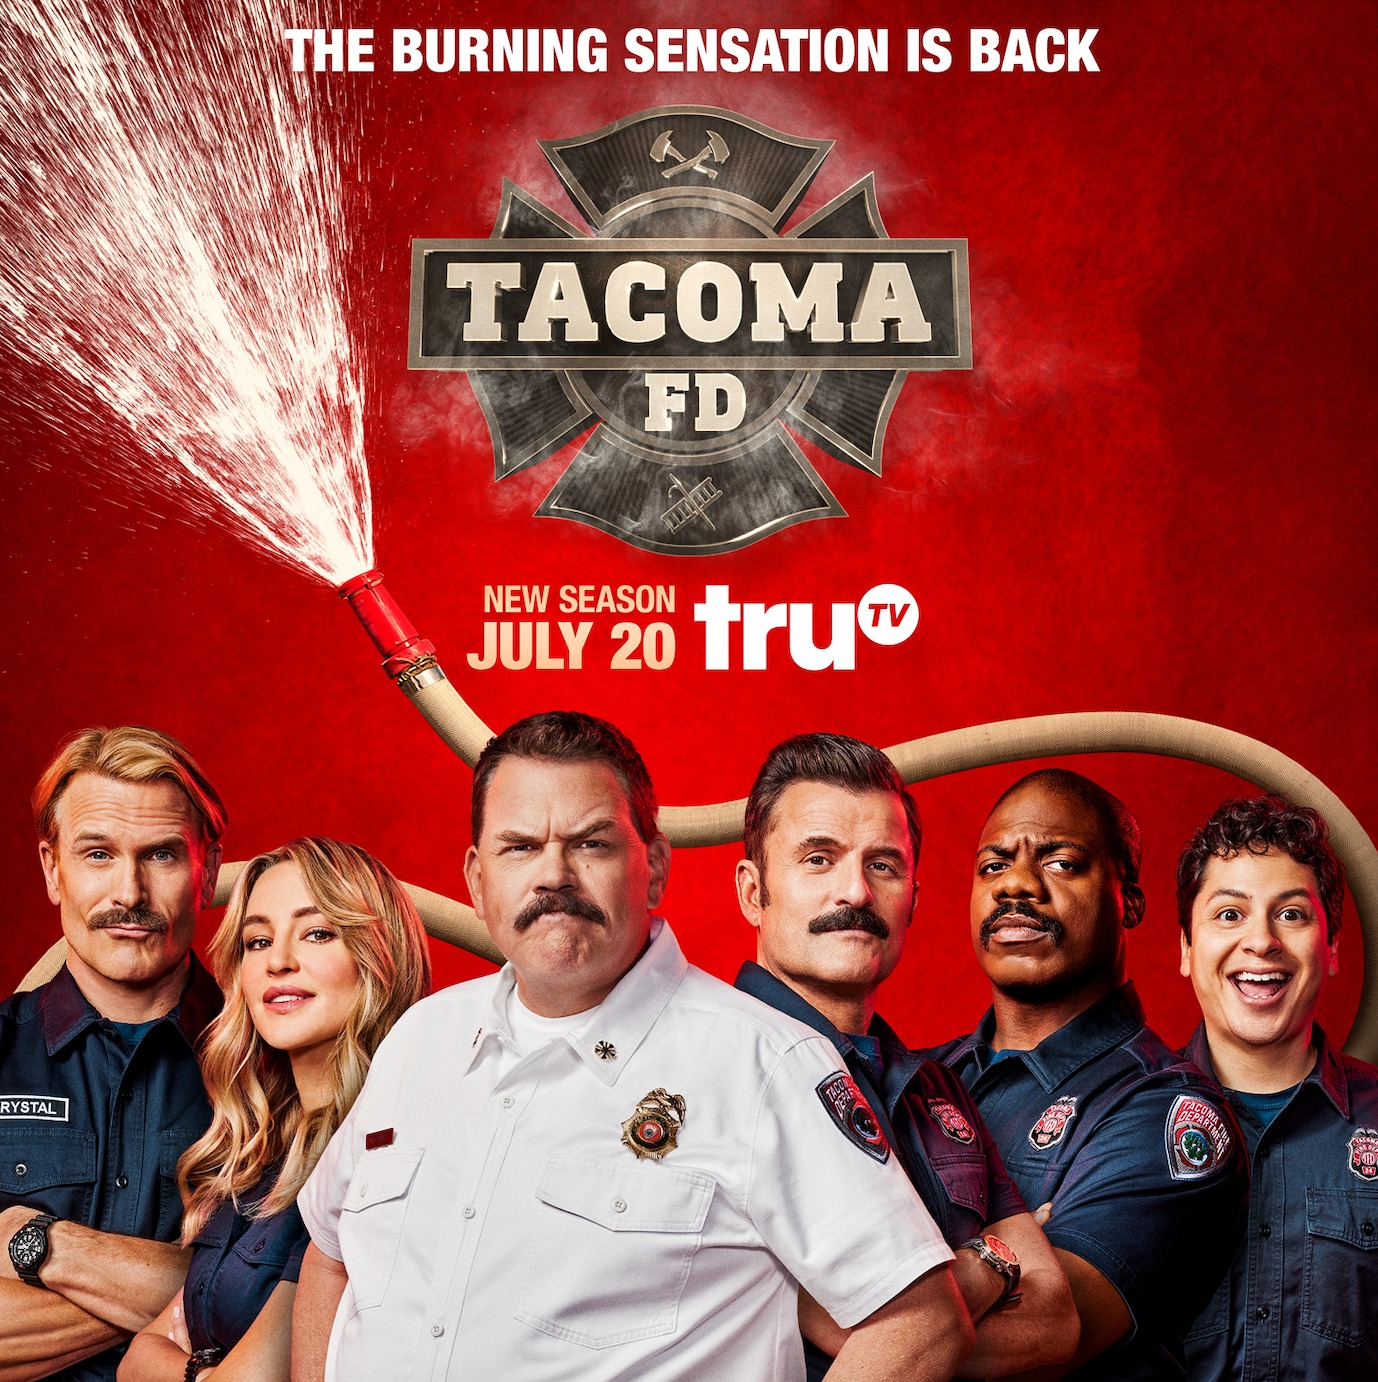 Today on Thursday, July 20 “Tacoma FD” Returns for Season 4 with Tony Danza and David Arquette